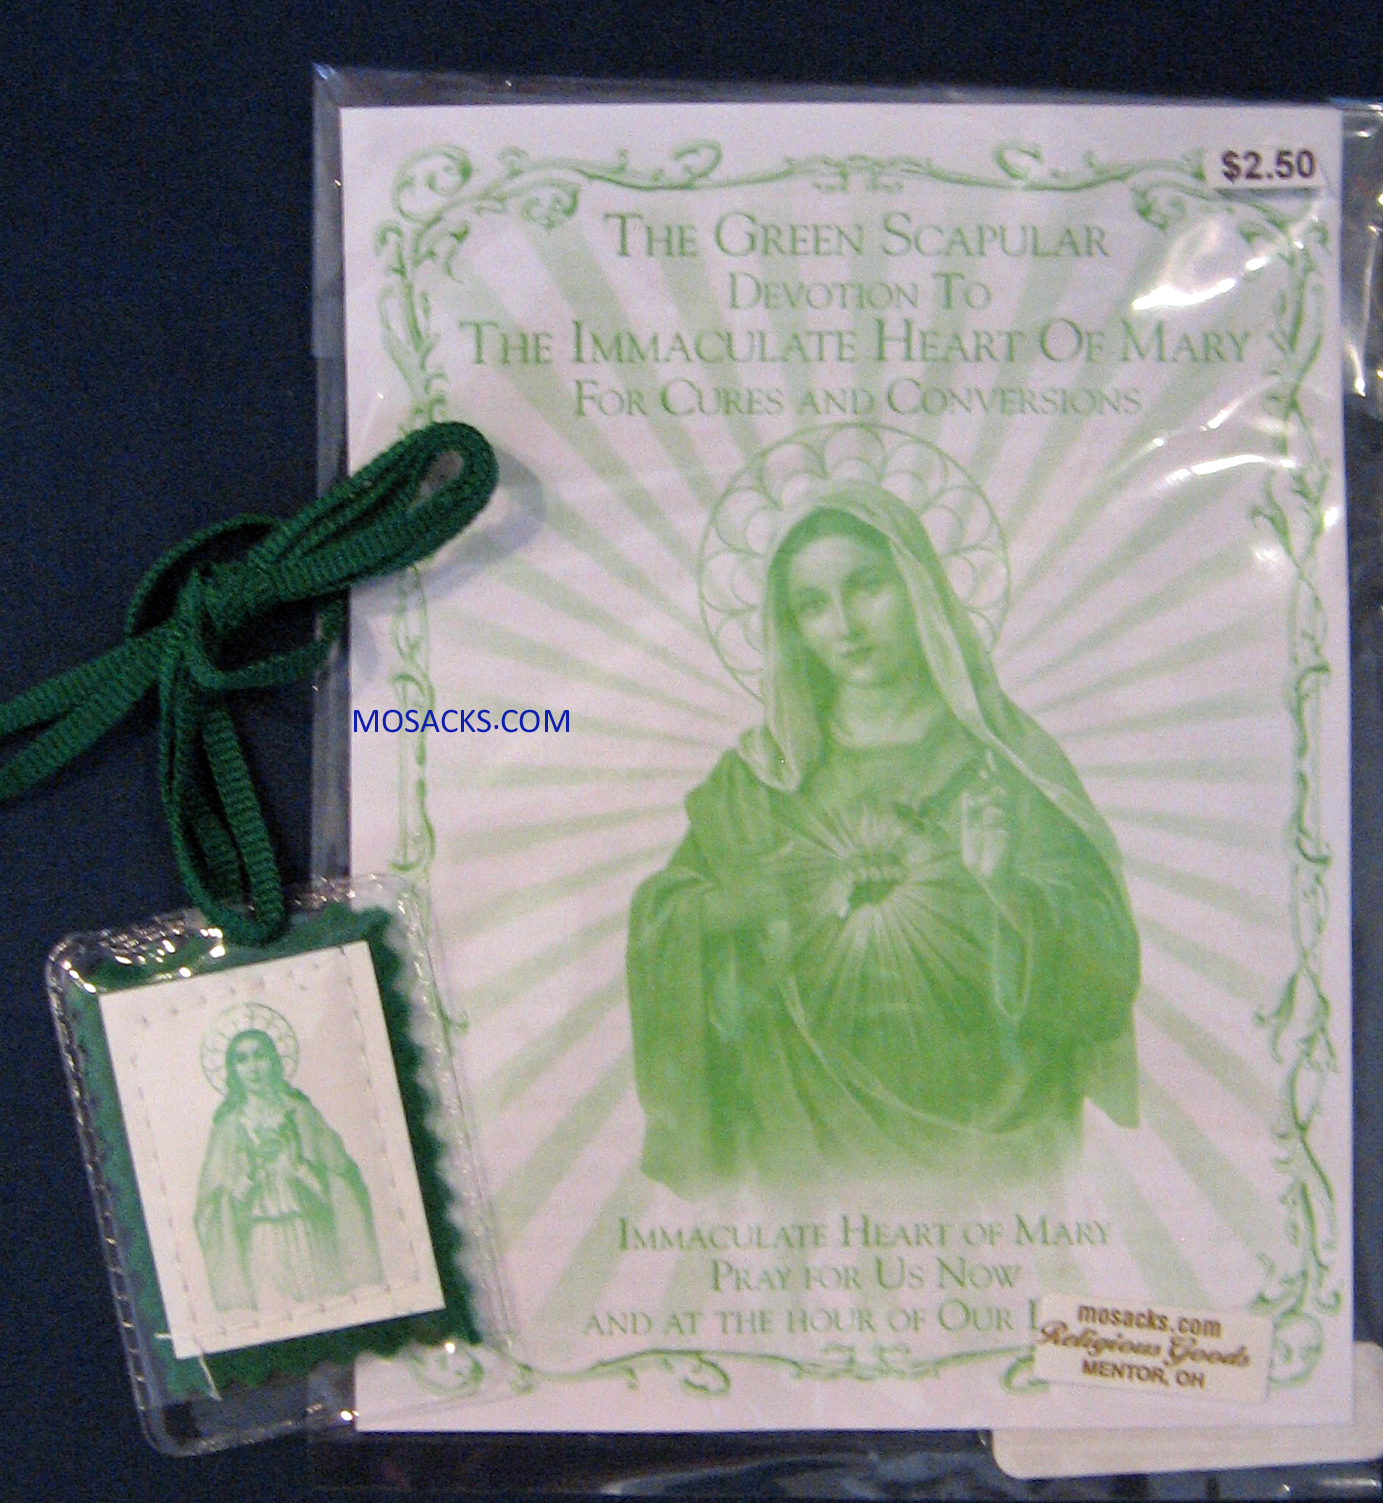 Green Scapular in Soft Plastic Case Devotion To Immaculate Heart 12-1506